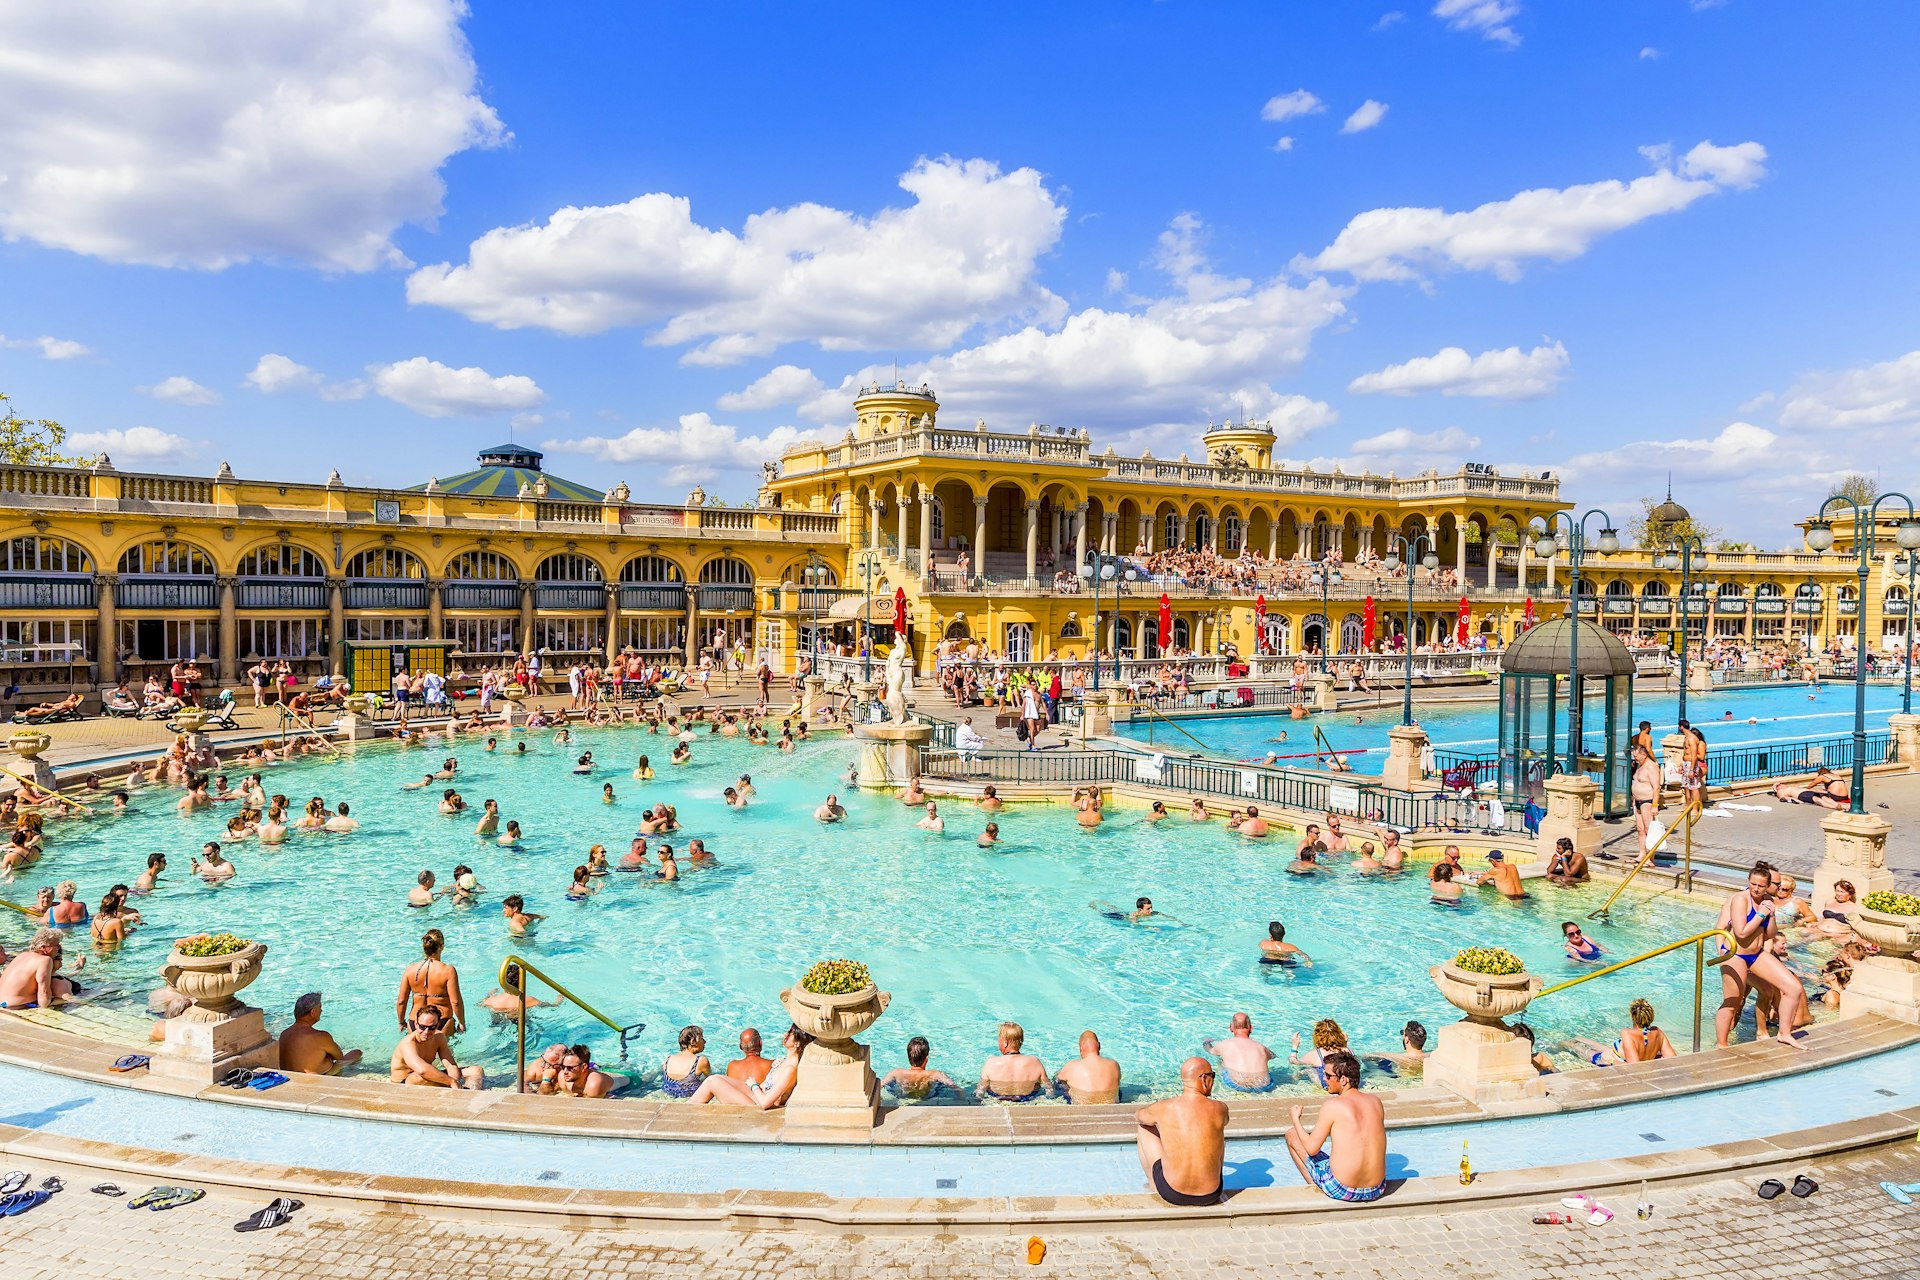 A huge outdoor spa pool filled with hundreds of people